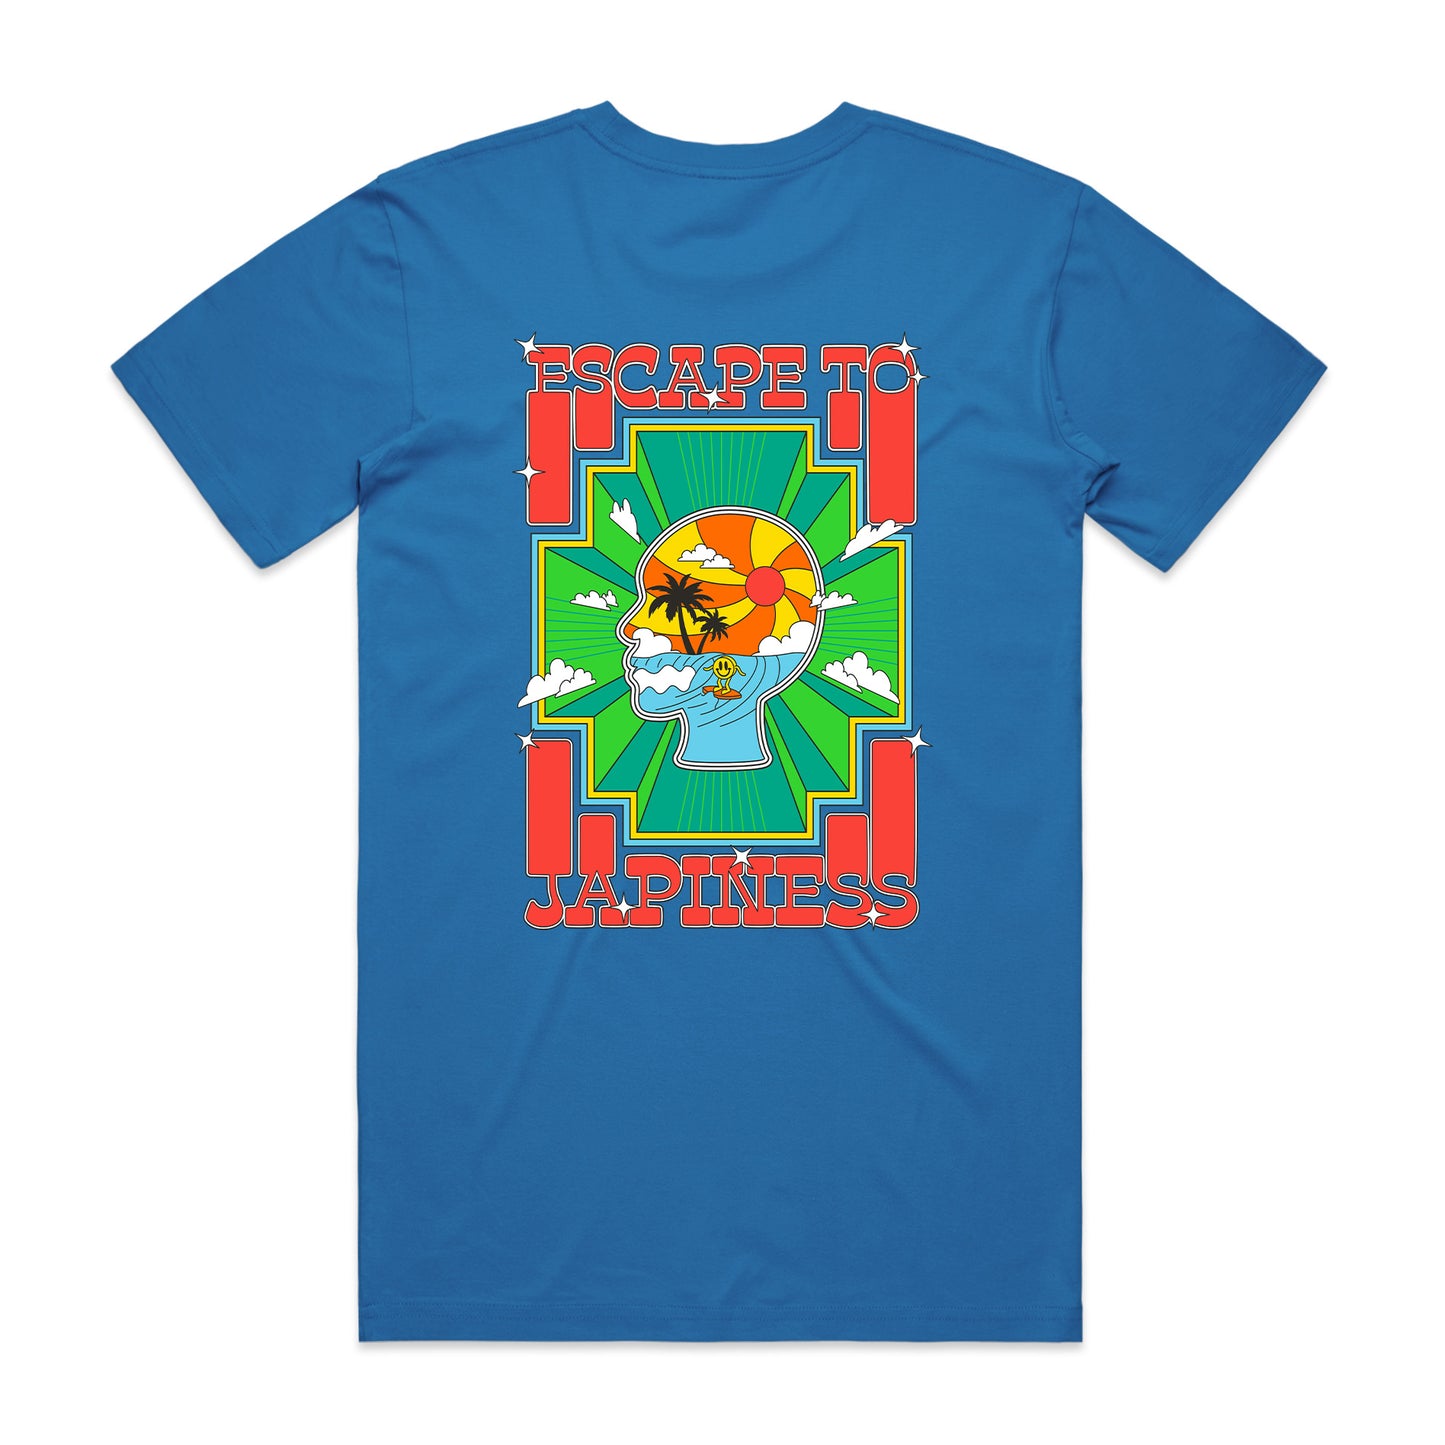 Escape To Japiness T-Shirt